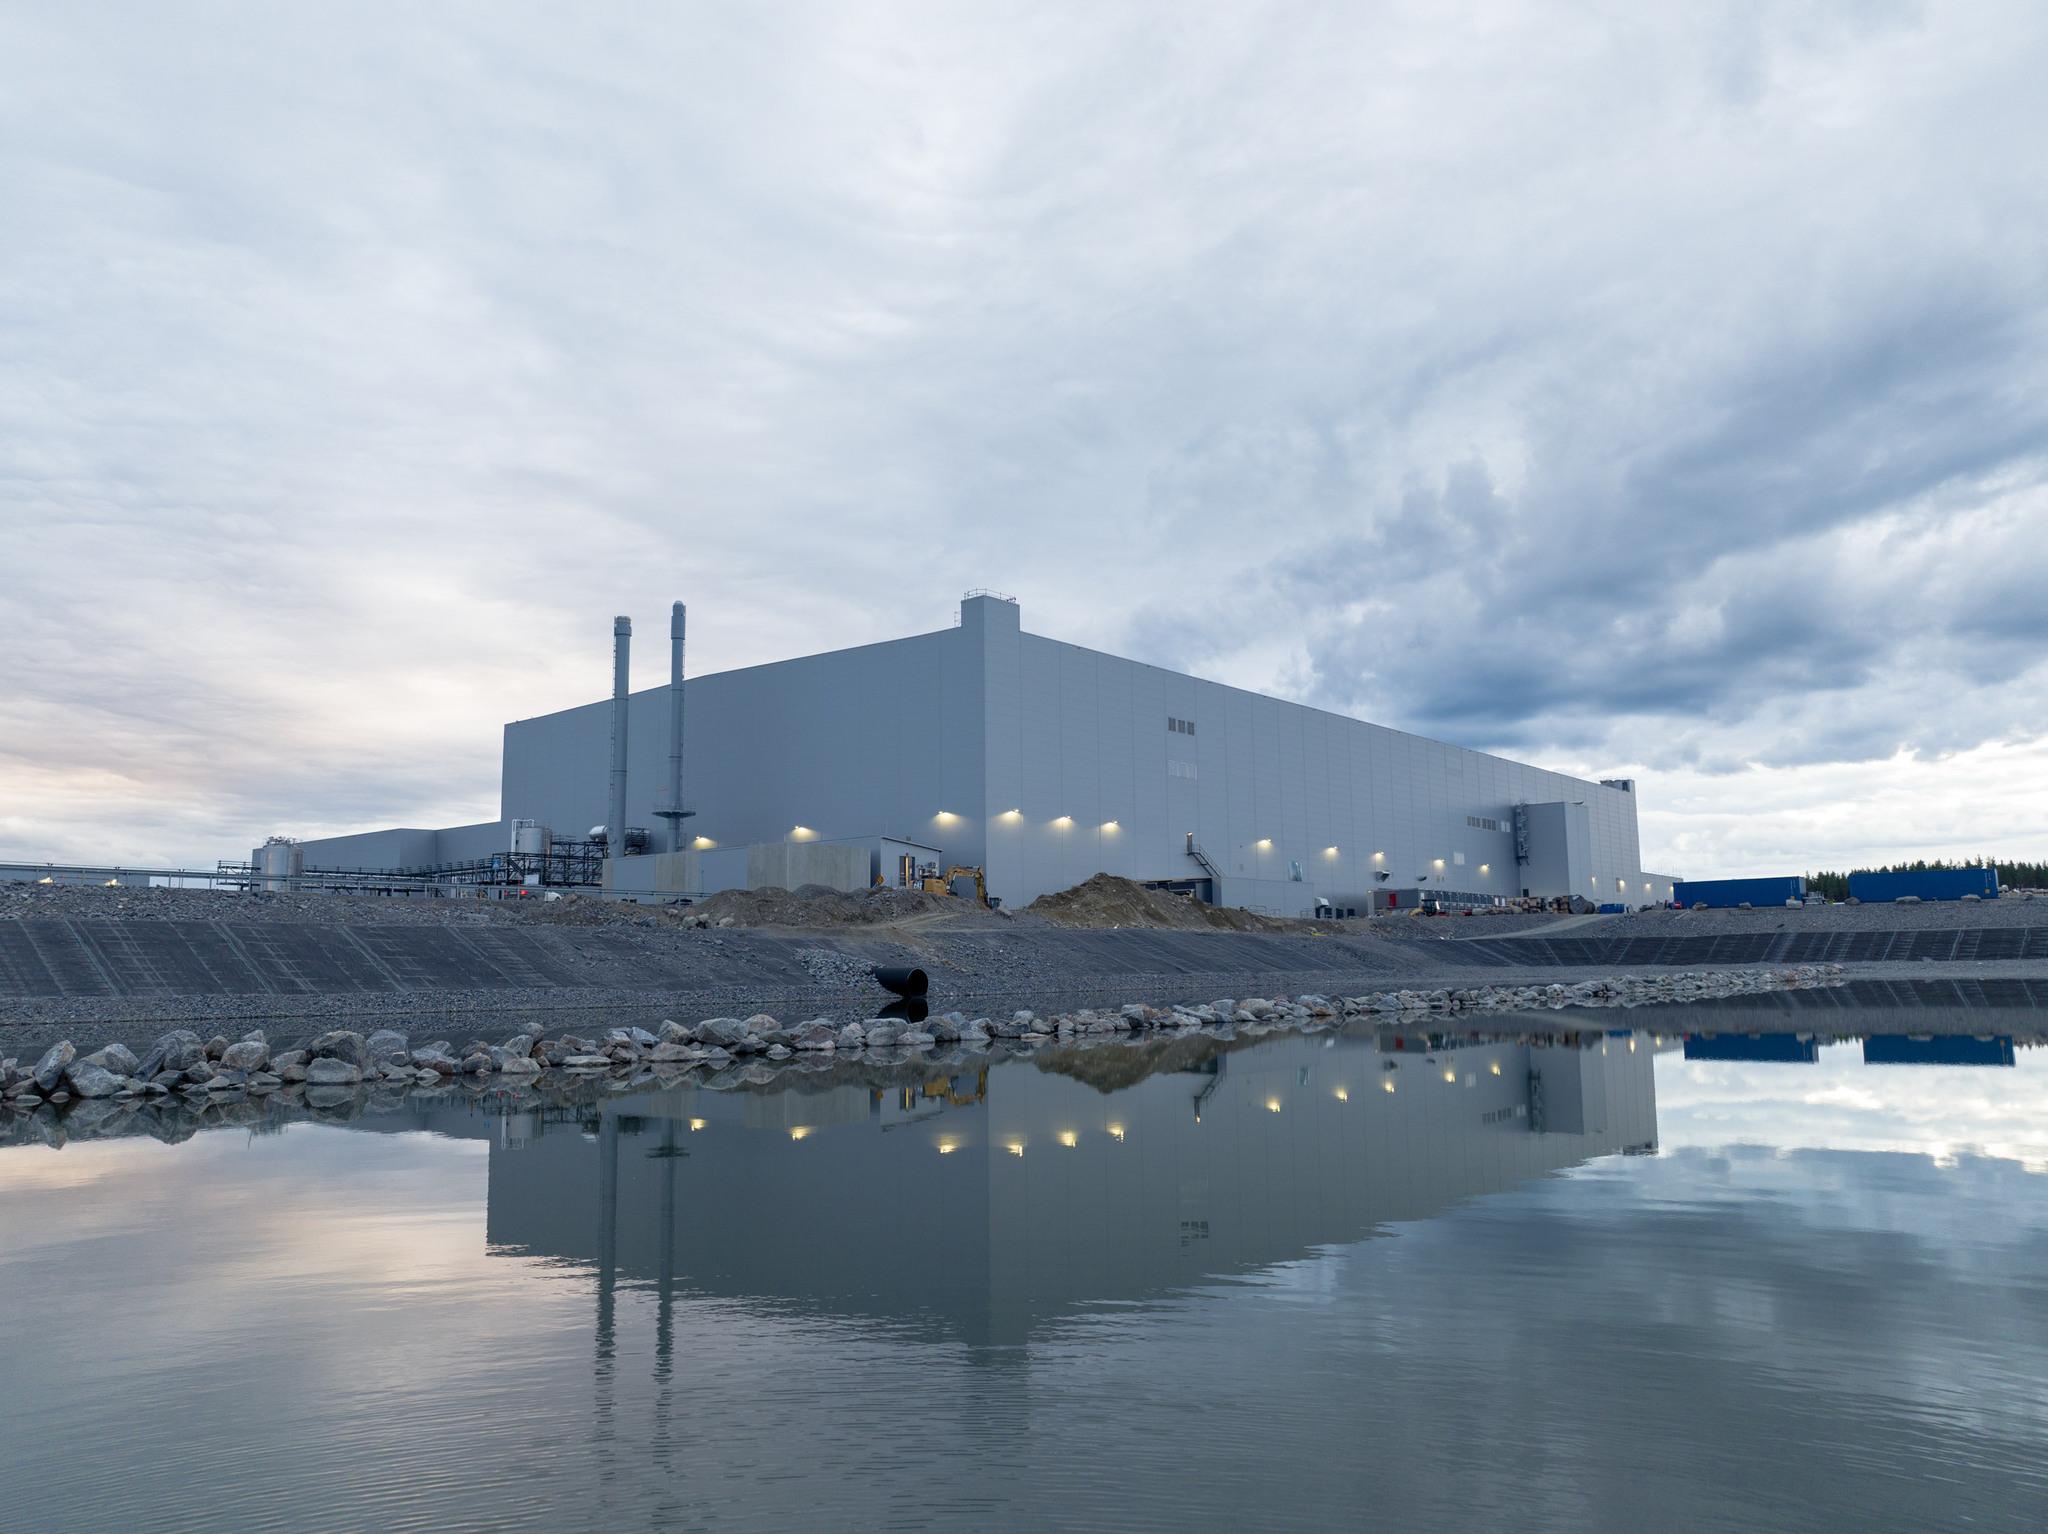 A factory building by the water, cloudy skies above. Northvolt is one of the Swedish companies that want to contribute to the electrification of transport.